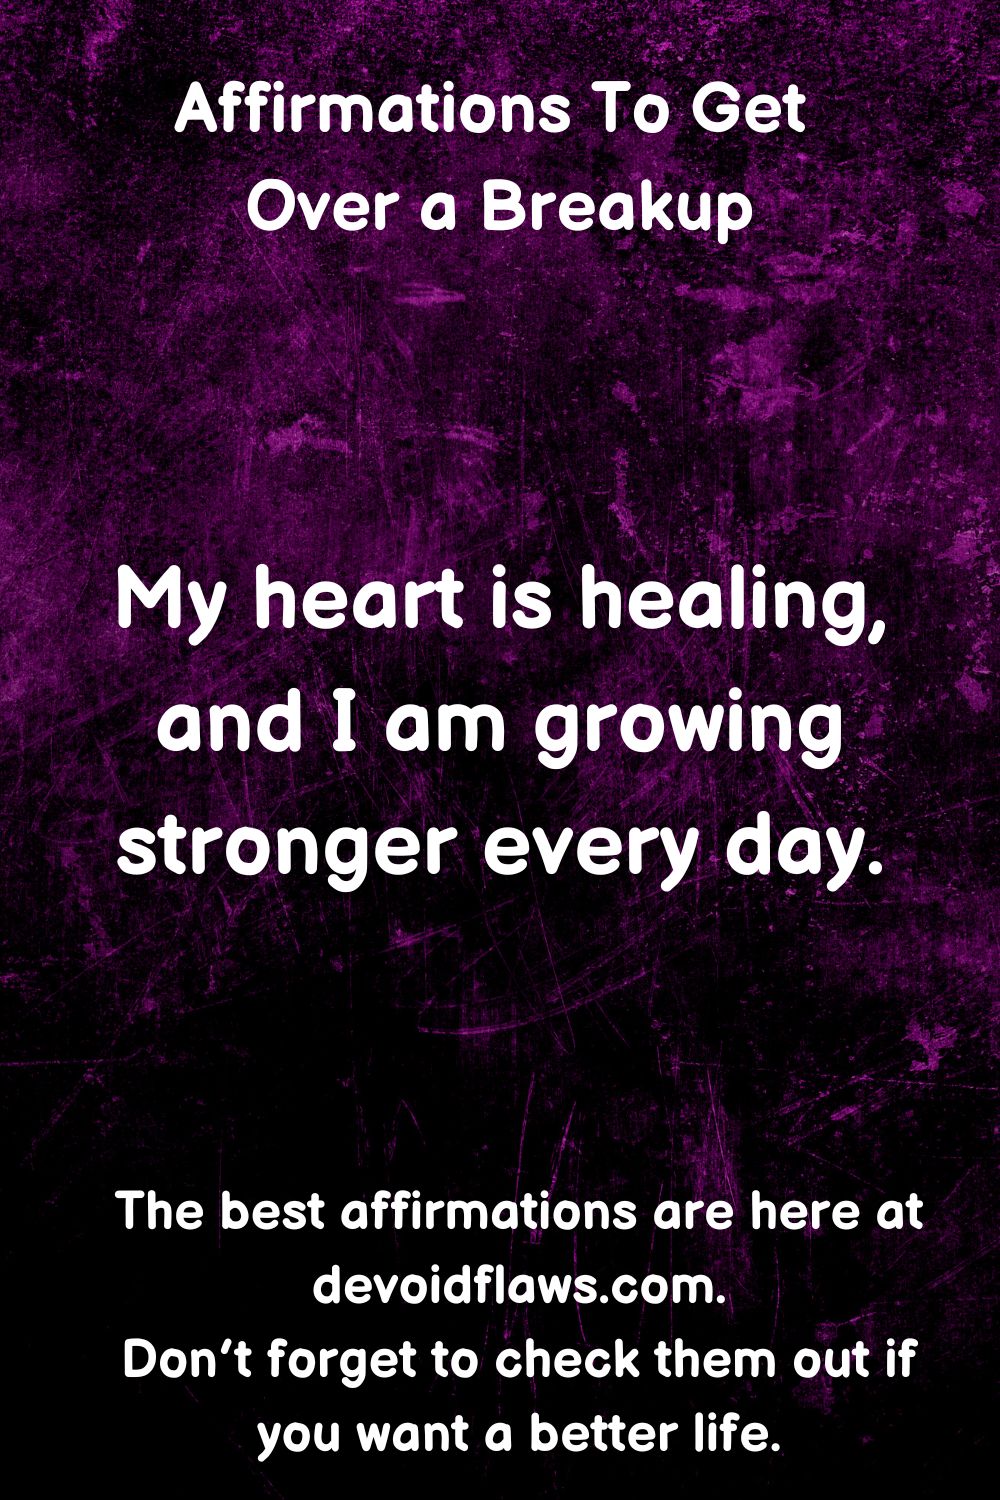 50 Positive Affirmations To Get Over a Breakup